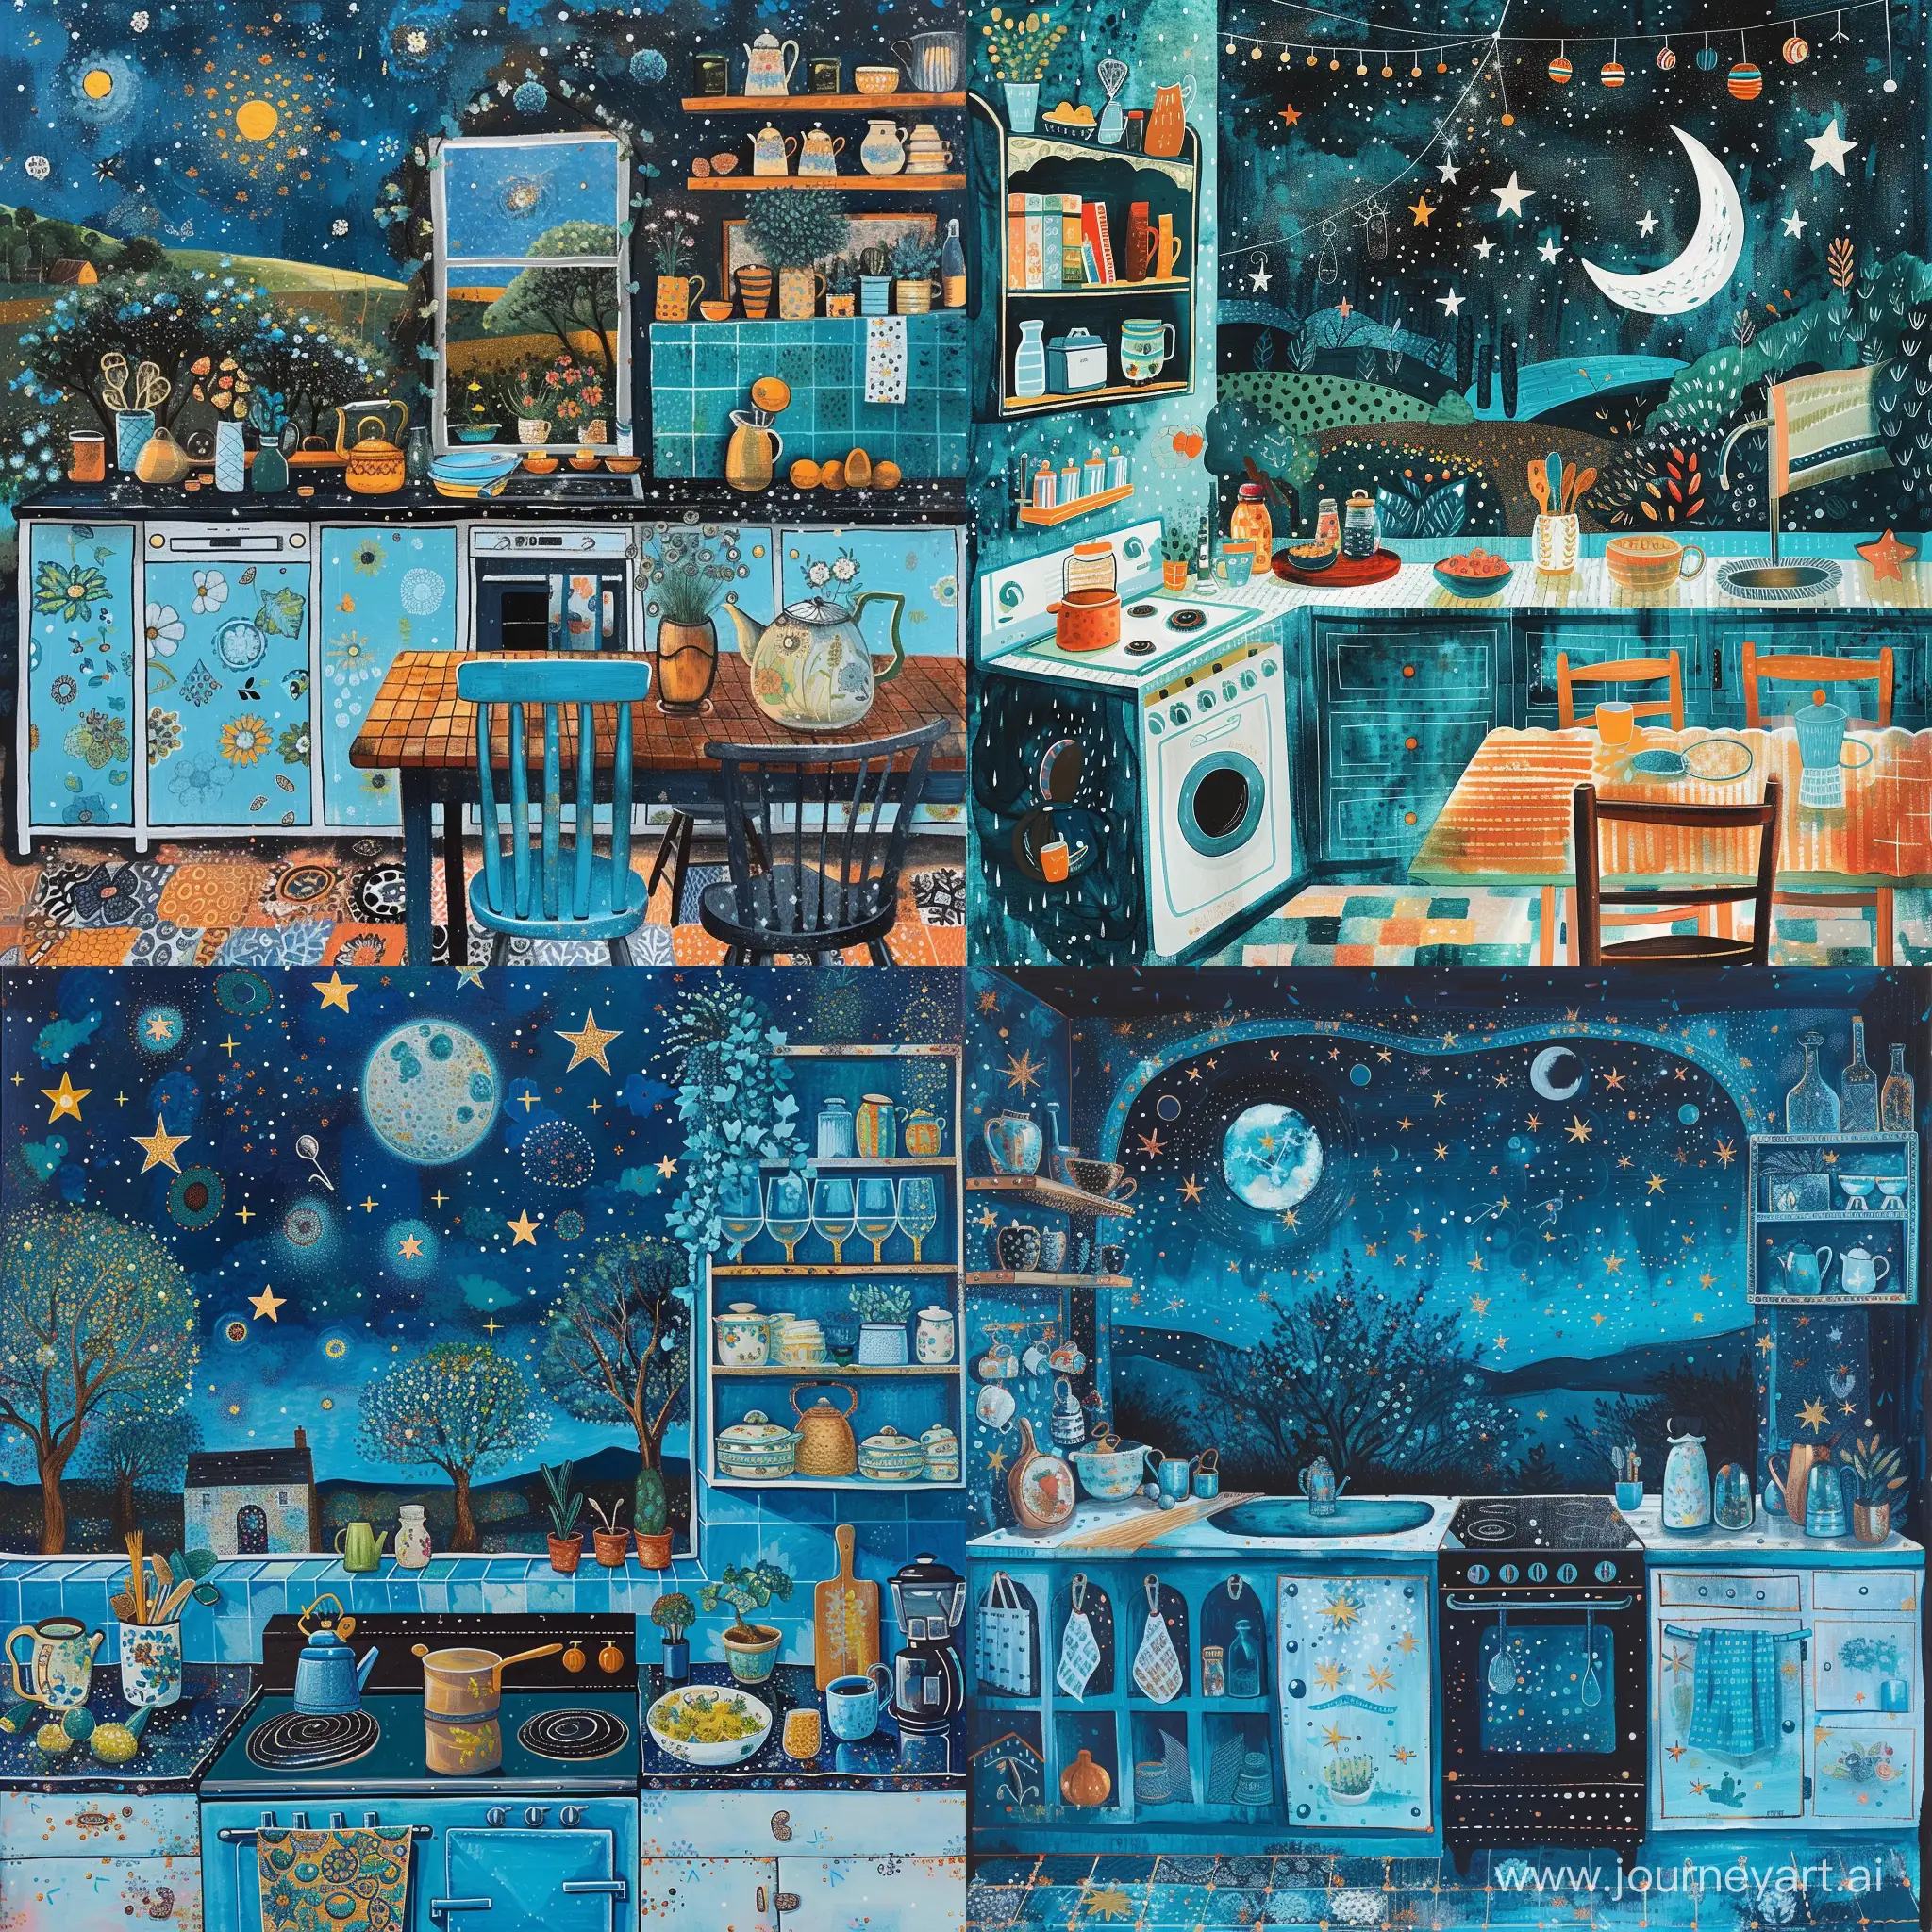 Illustration, night core, blue and teal in the kitchen, in the style of amanda clark, mandy disher, charming, idyllic rural scenes, glittery and shiny, alma woodsey thomas, konica big mini, the stars art group (xing xing) in style of whimsical naive art, nostalgic atmosphere